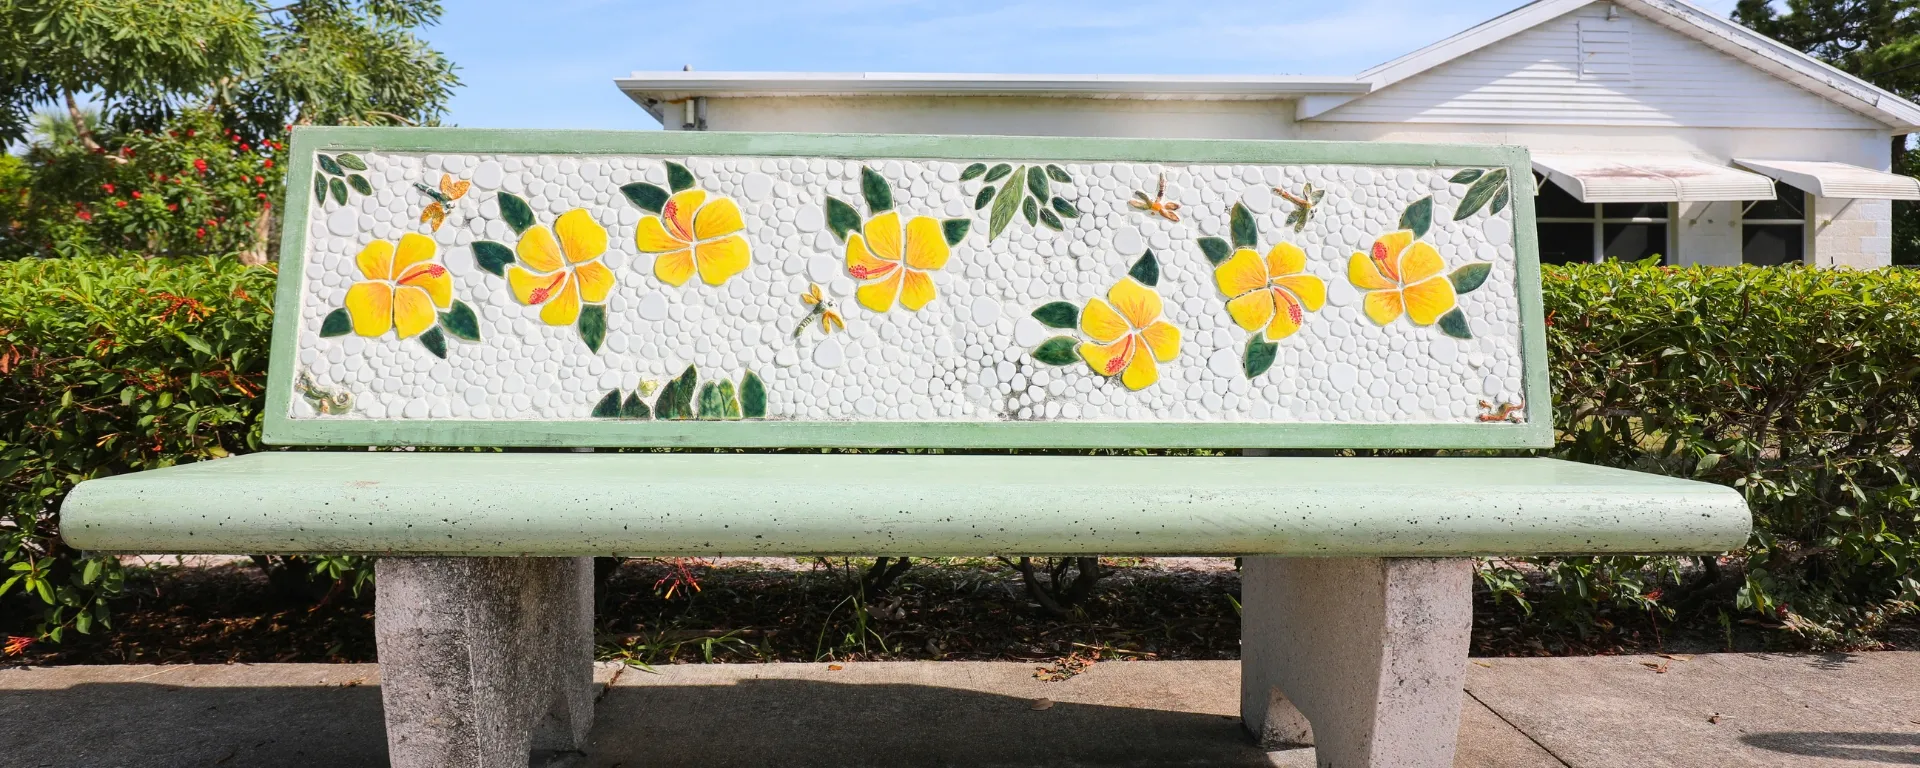 Image of a mosaic bench in Rio by artist Mia Lindberg as part of Martin County's Art in Public Places